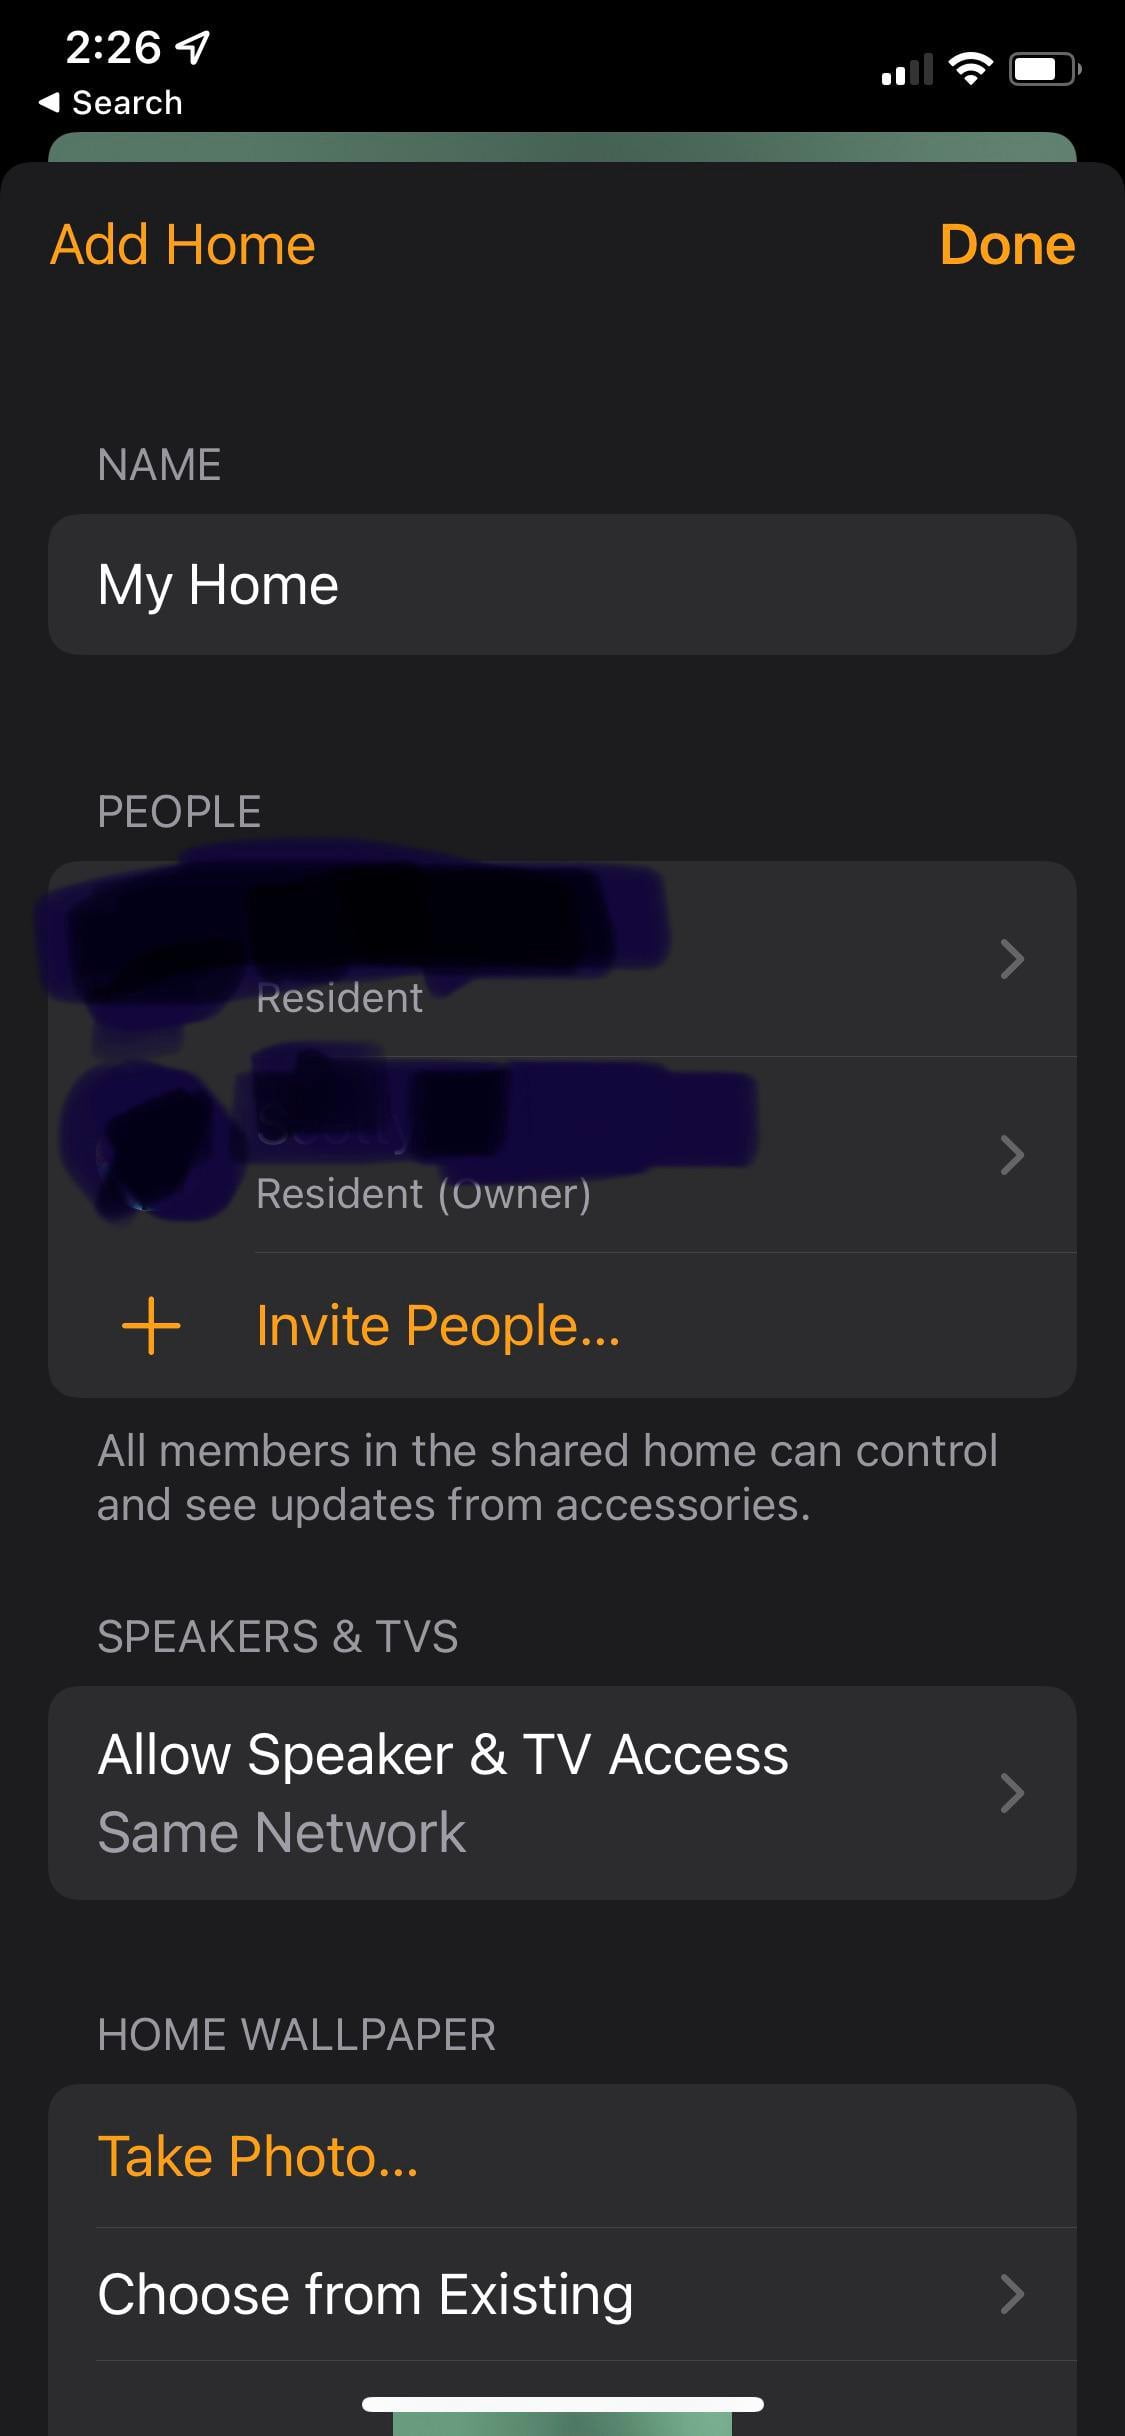 The wife cannot control the Wemo HomeKit connector